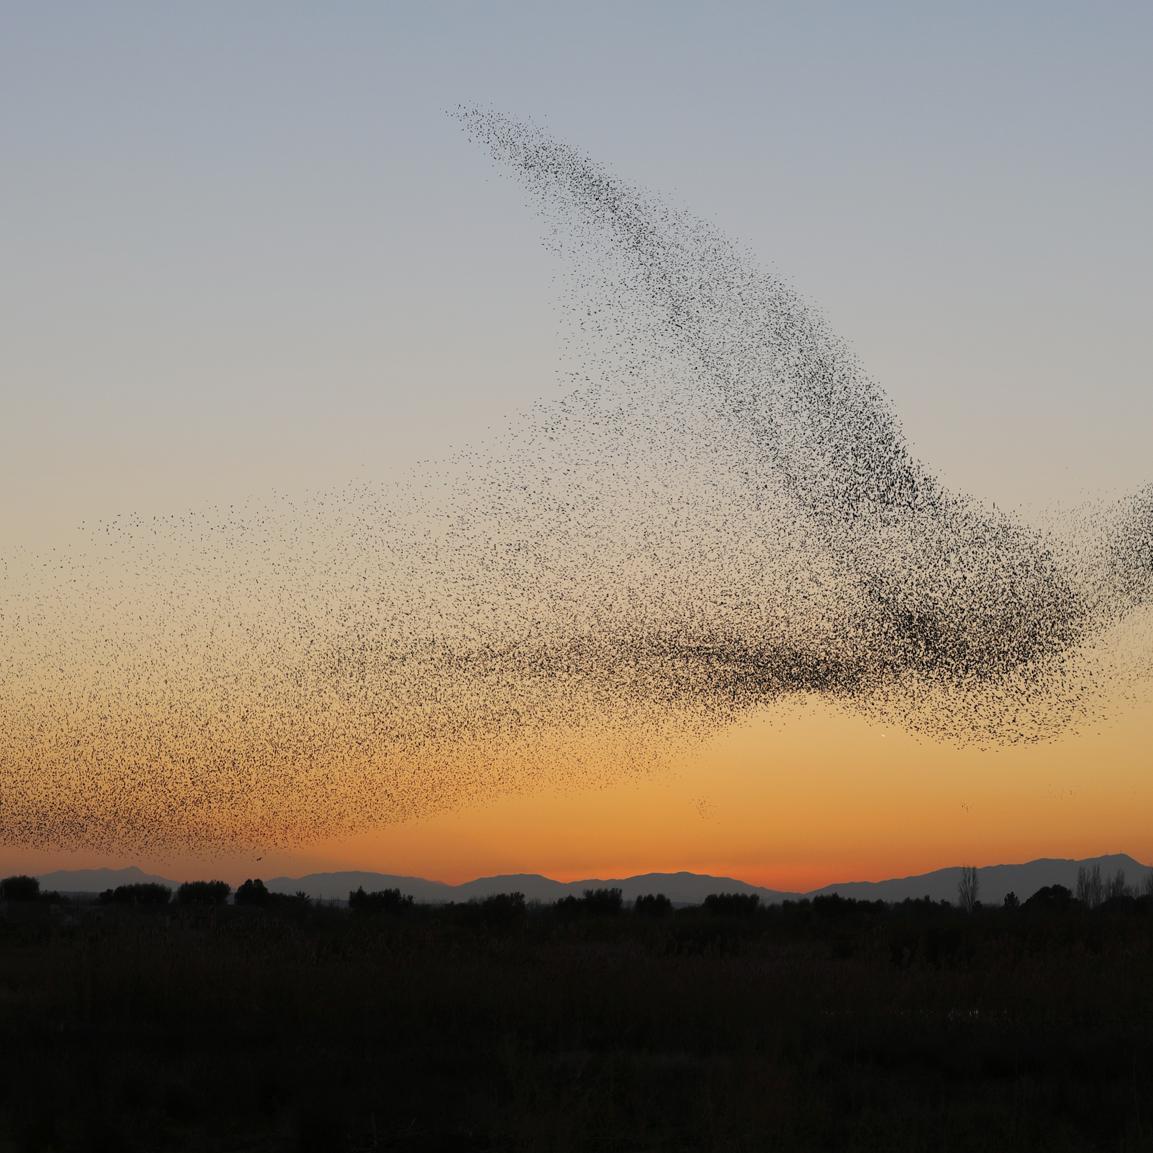 A flock of starlings flies at sunset. The many individual birds form a cloud in the shape of a bird.